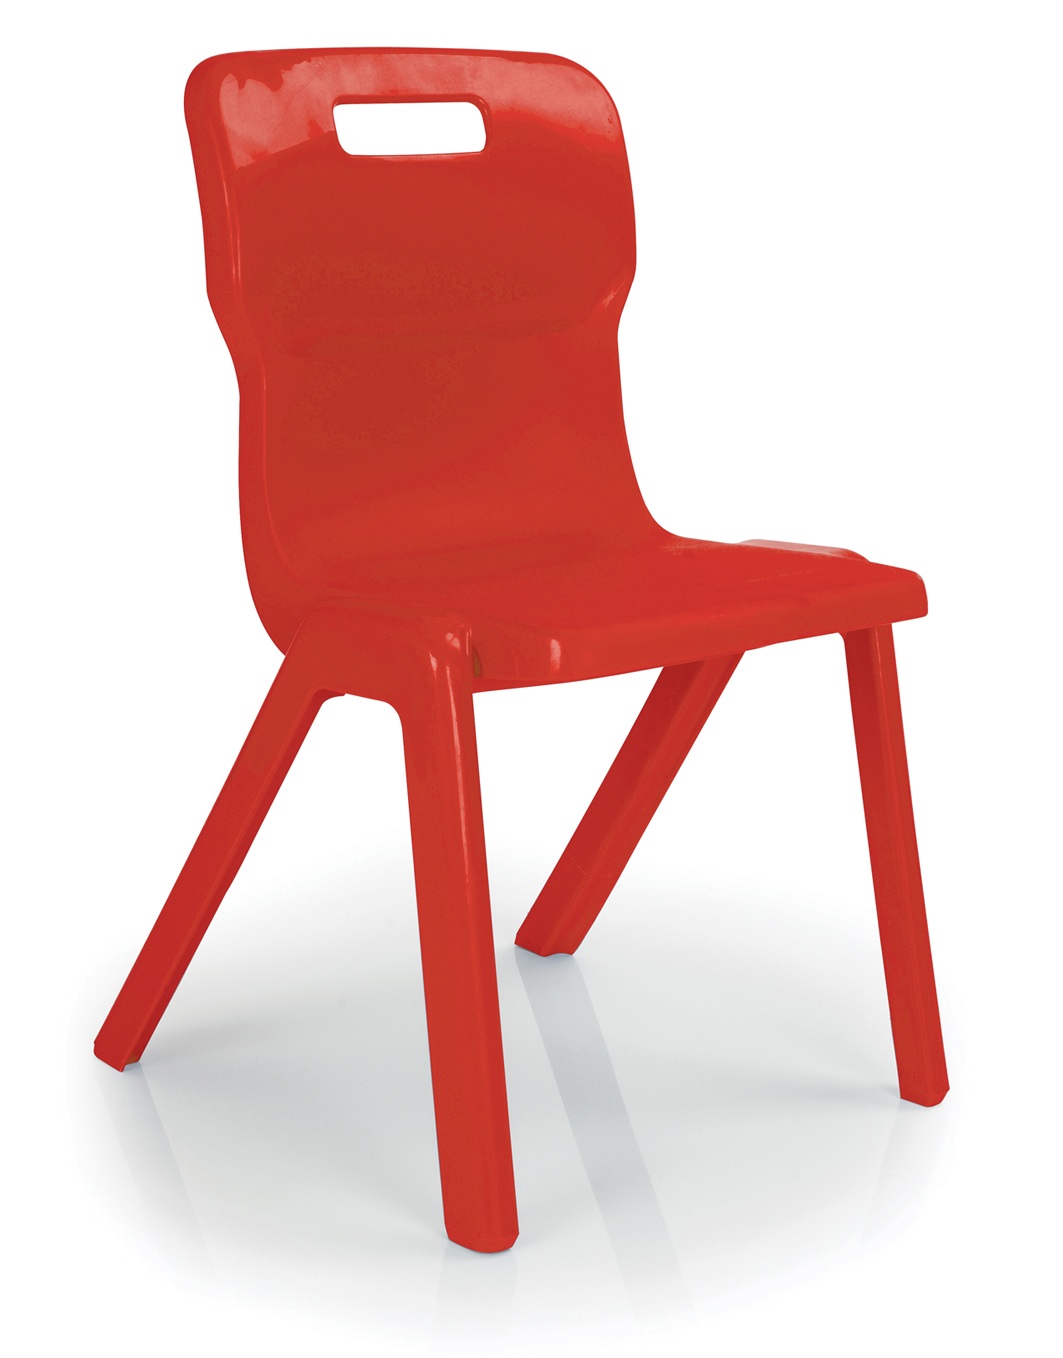 Titan One Piece Classroom Chair in Red